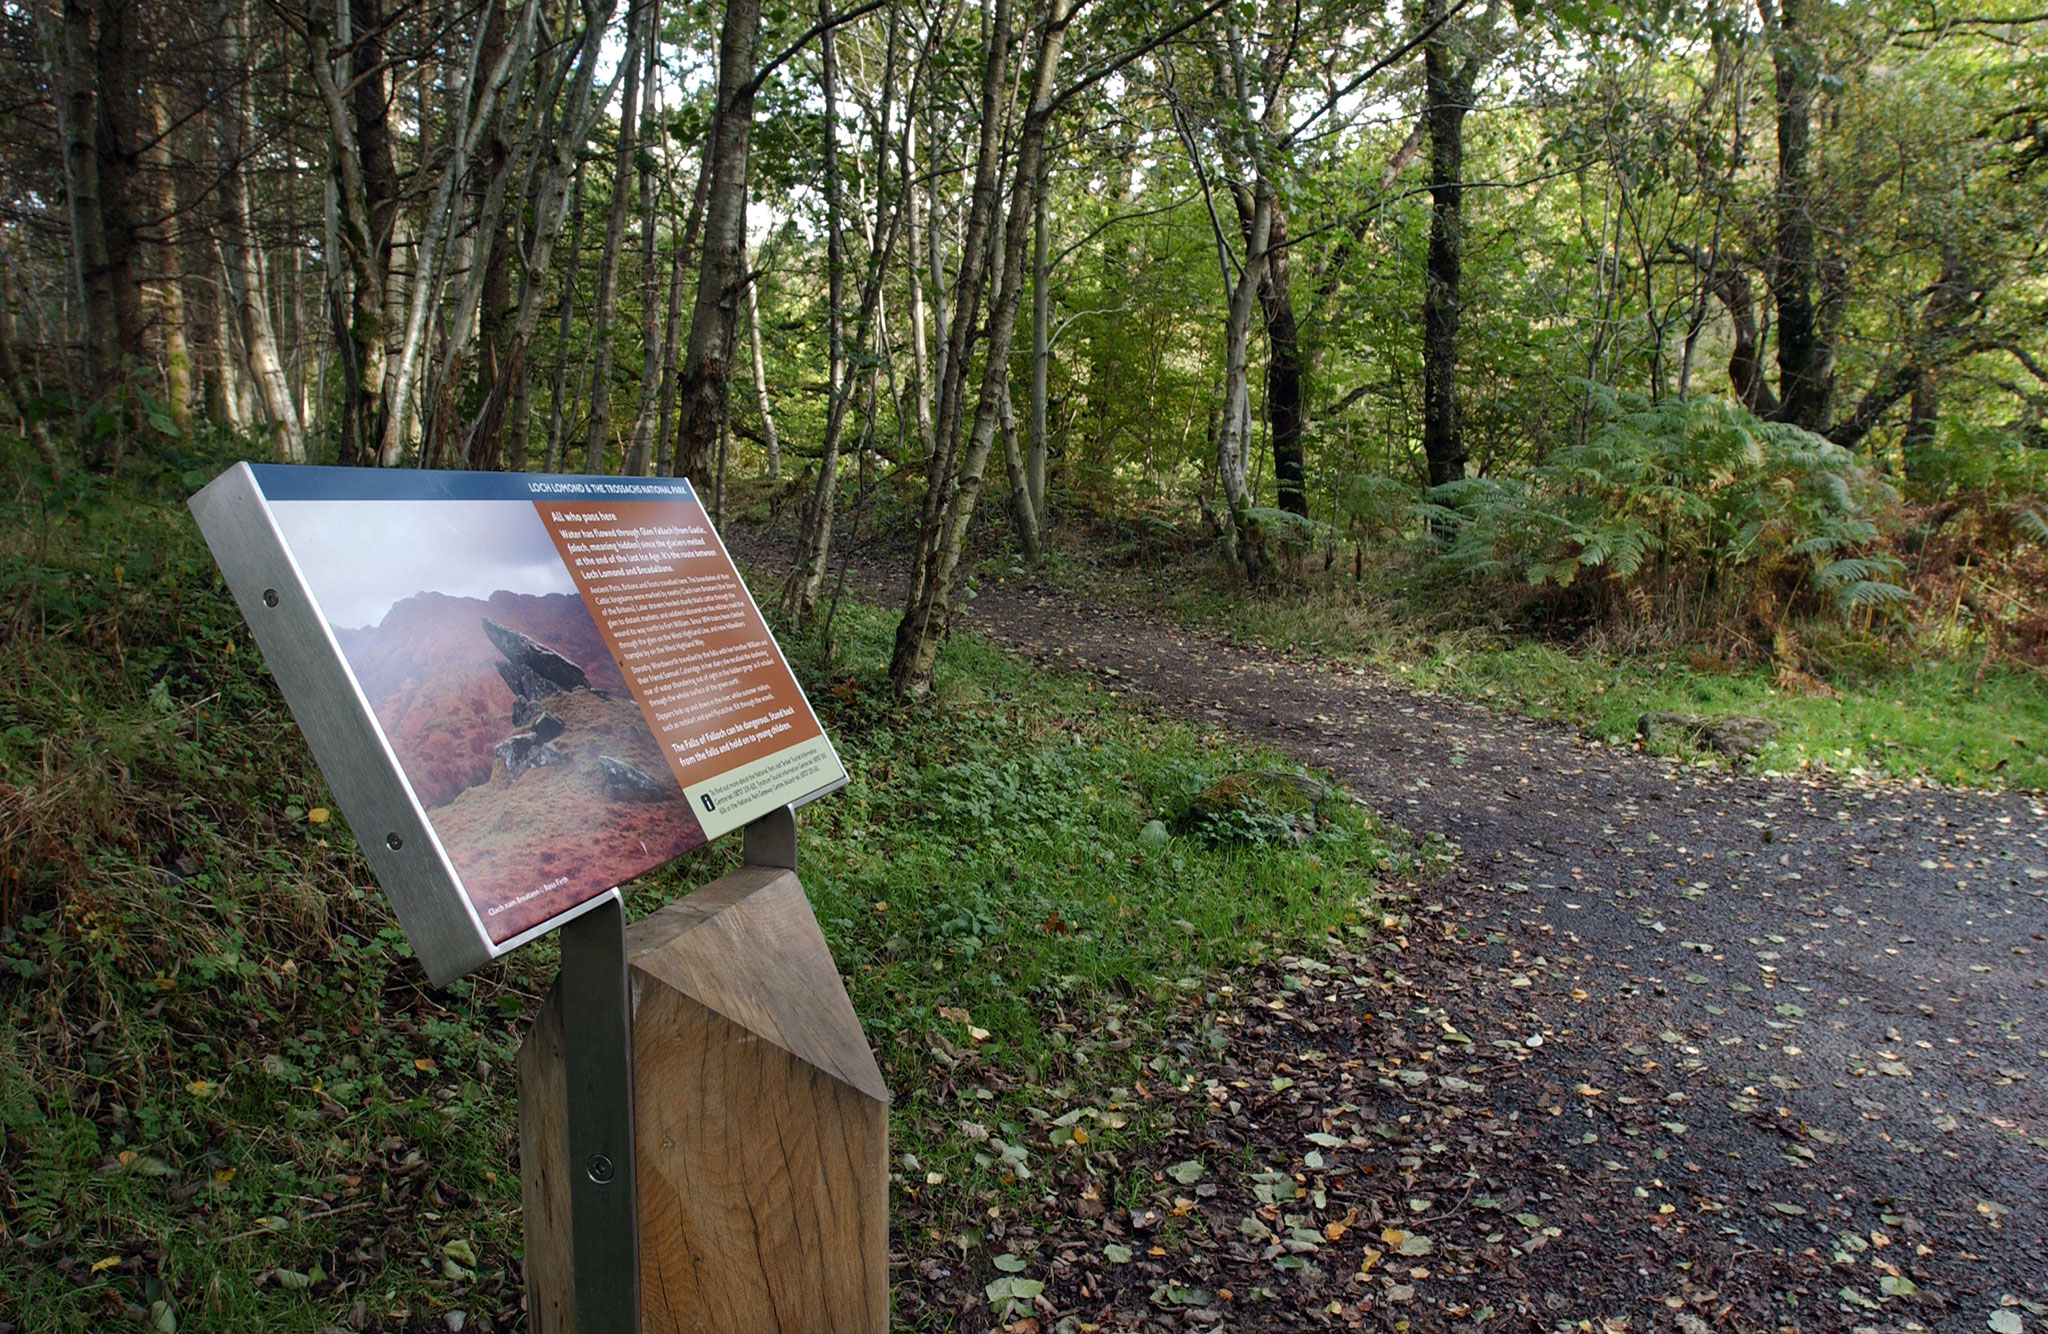 Loch Lomond and The Trossachs National Park signage